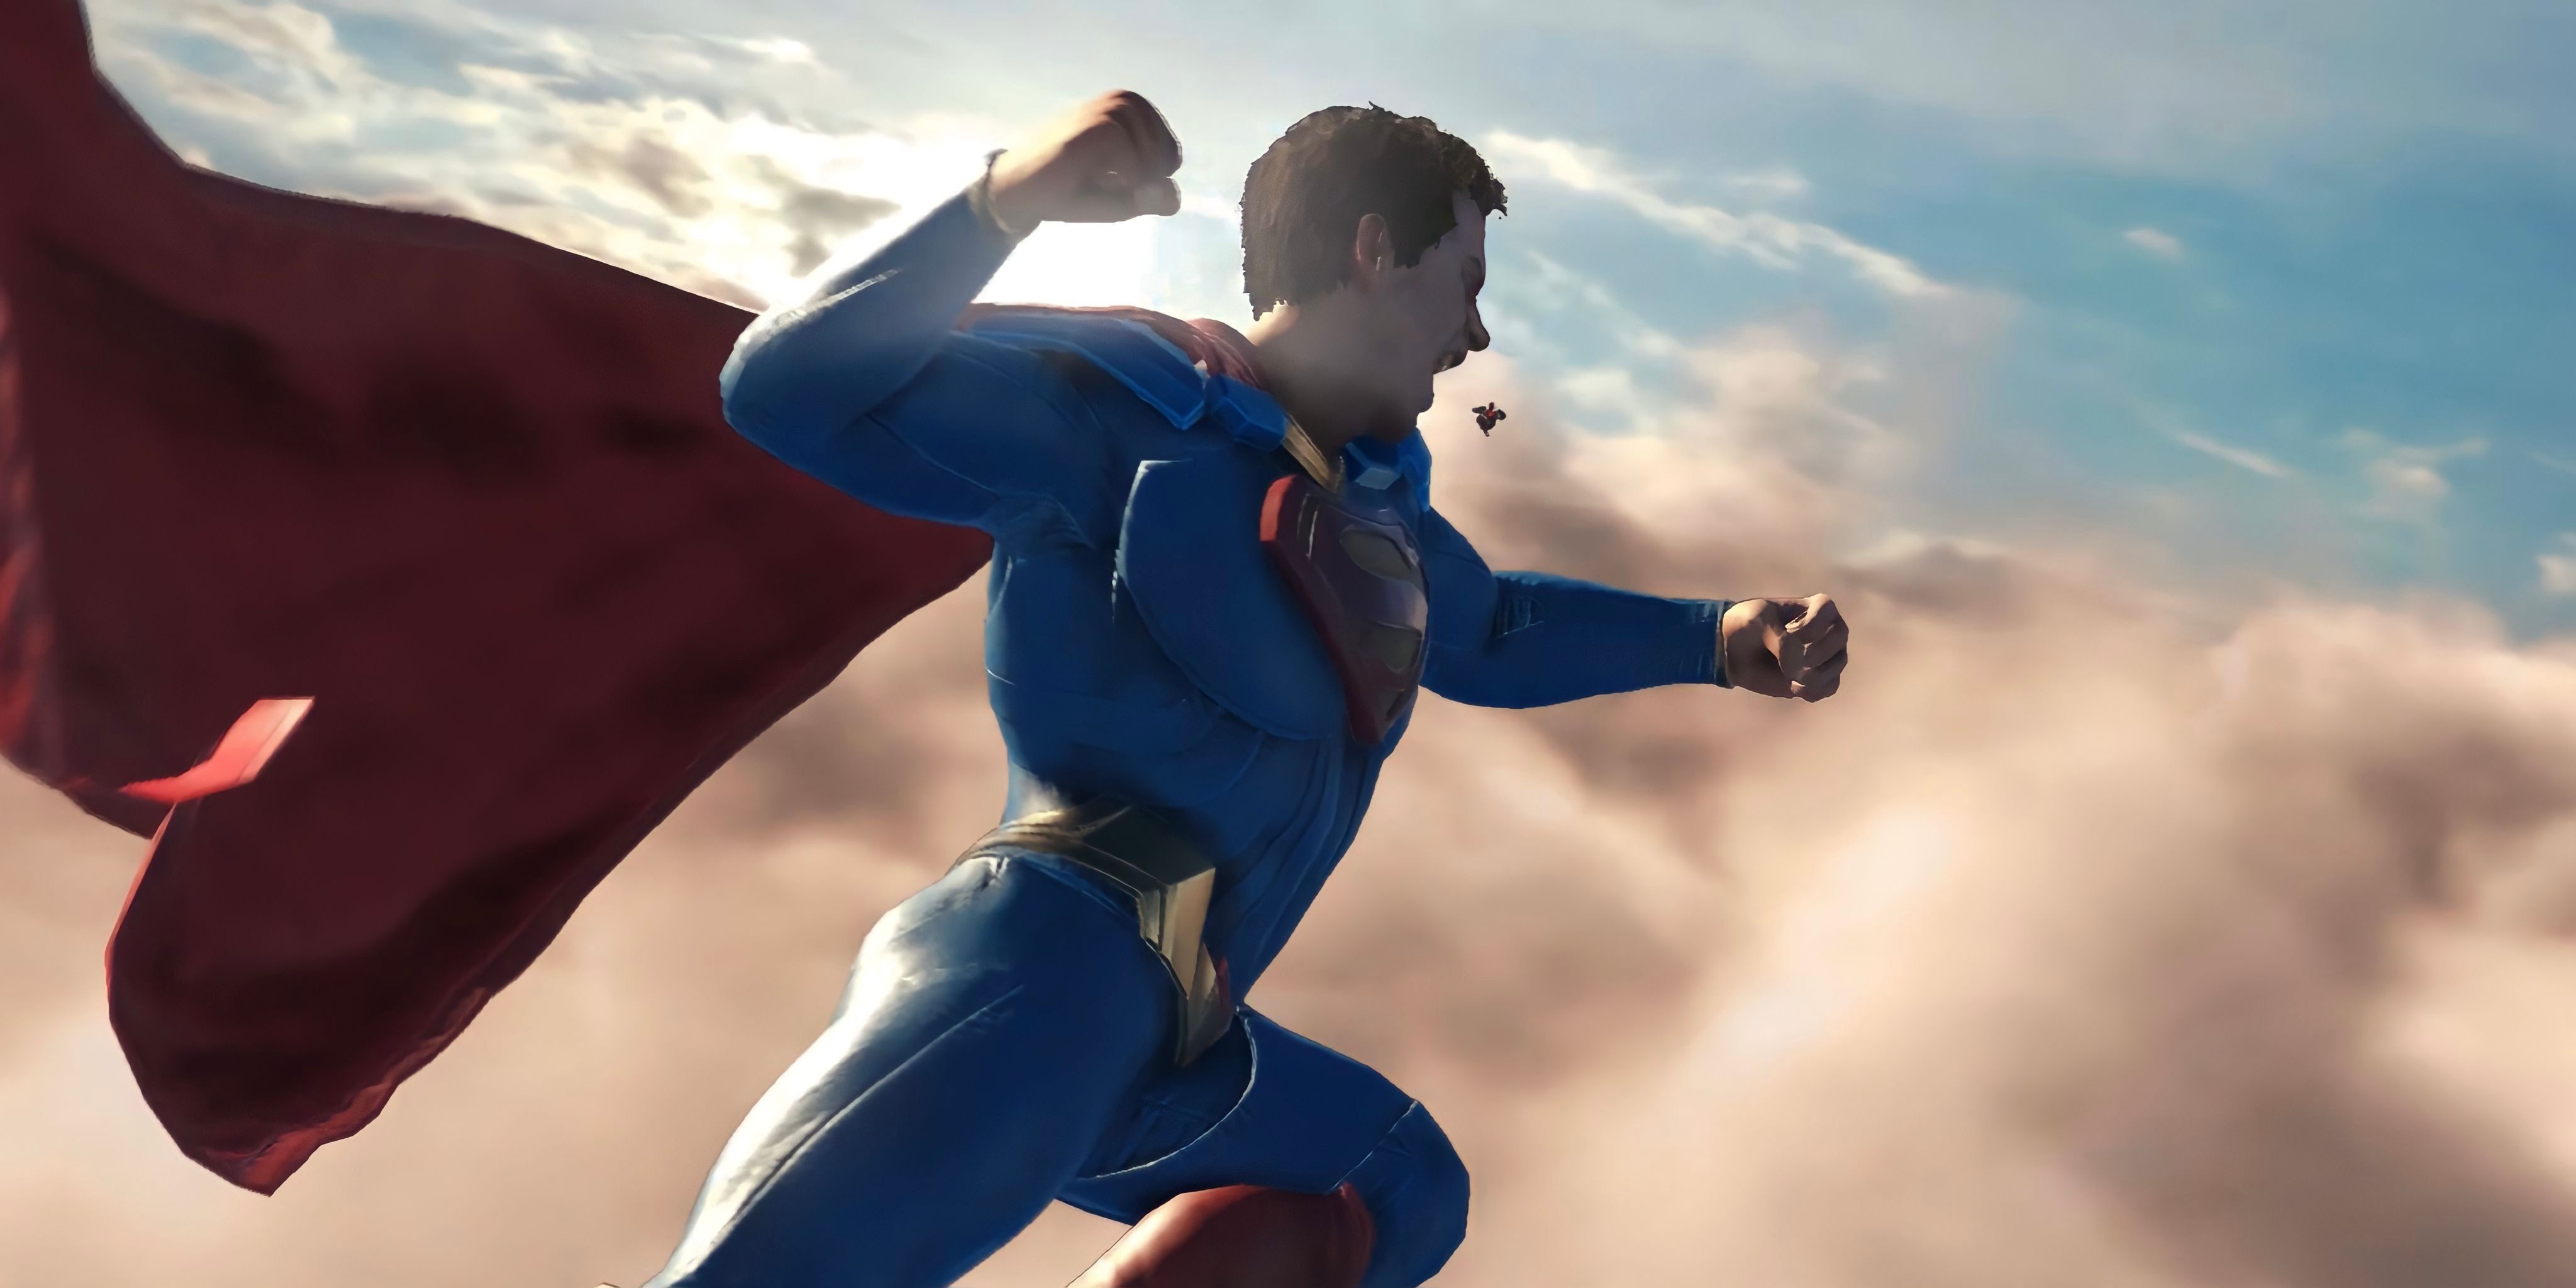 Superman flying high in the Injustice game